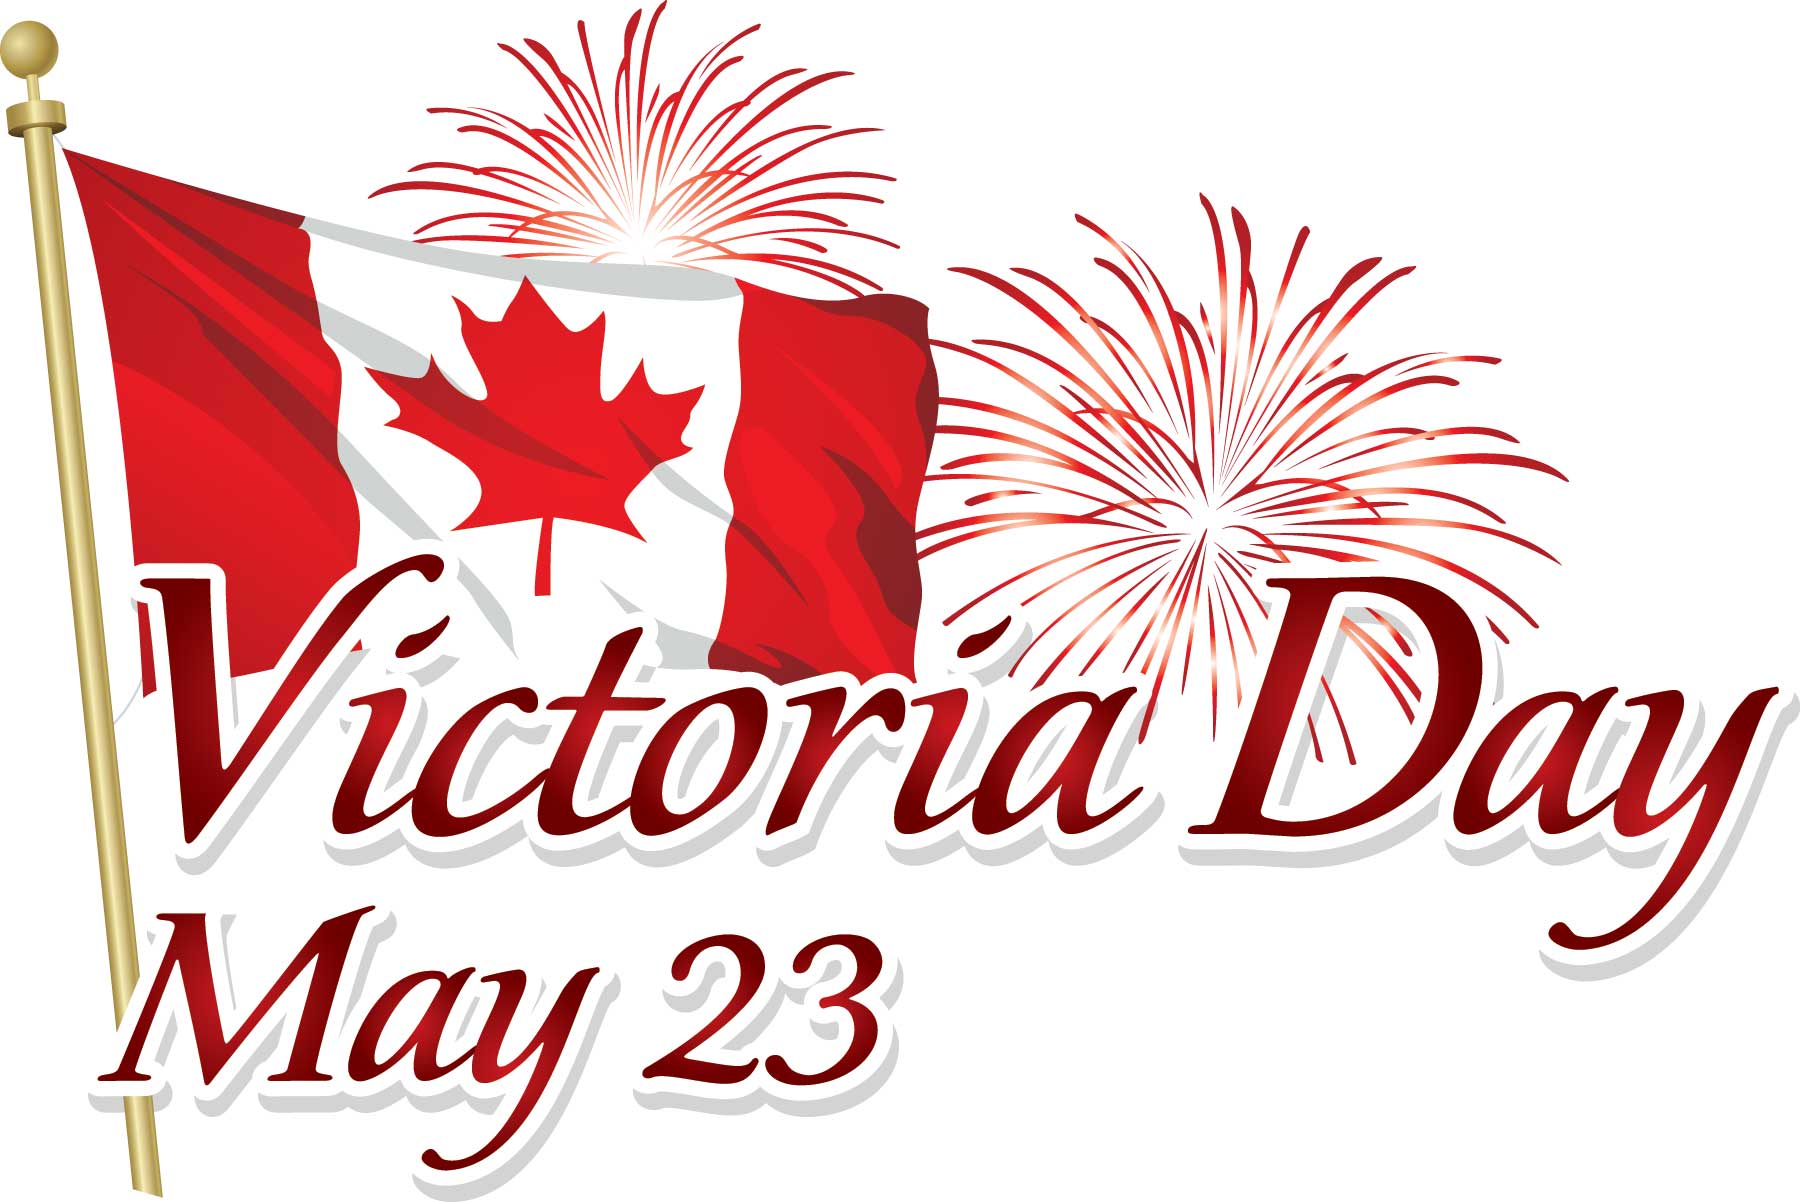 Victoria Day Is A Public Holiday Observed Across Canada On The Monday    